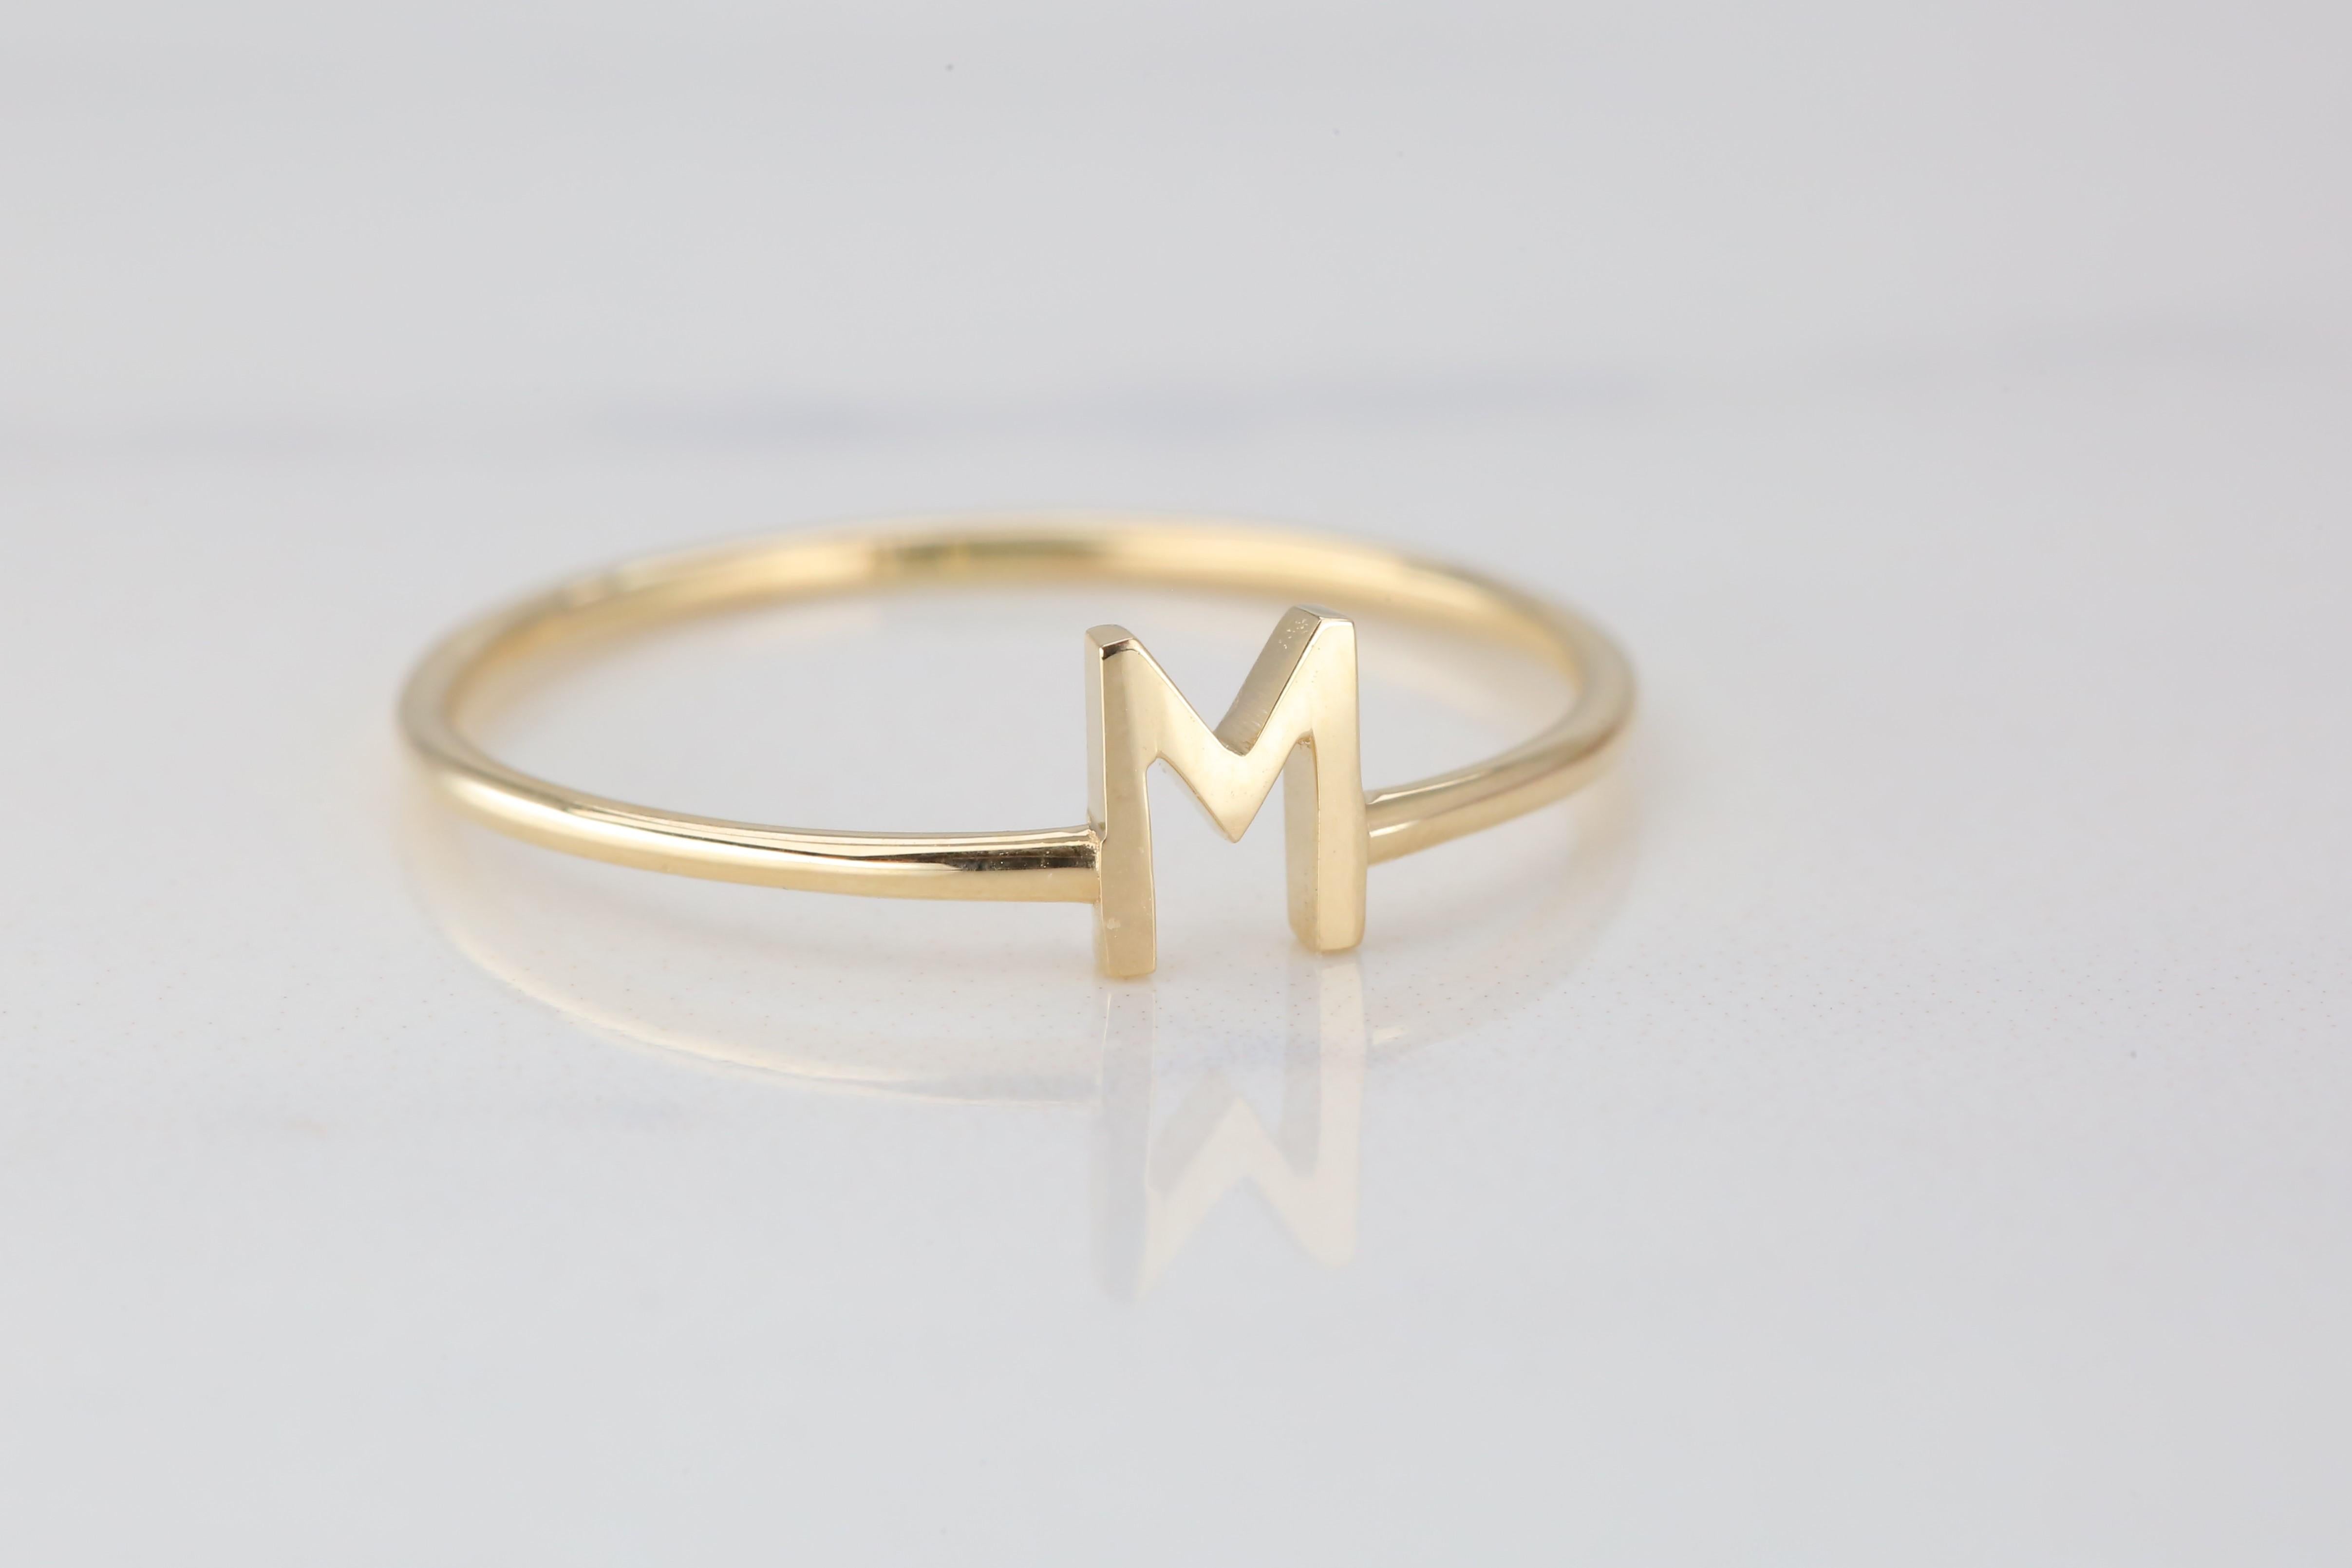 For Sale:  14K Gold Initial M Letter Ring, Personalized Initial Letter Ring 3